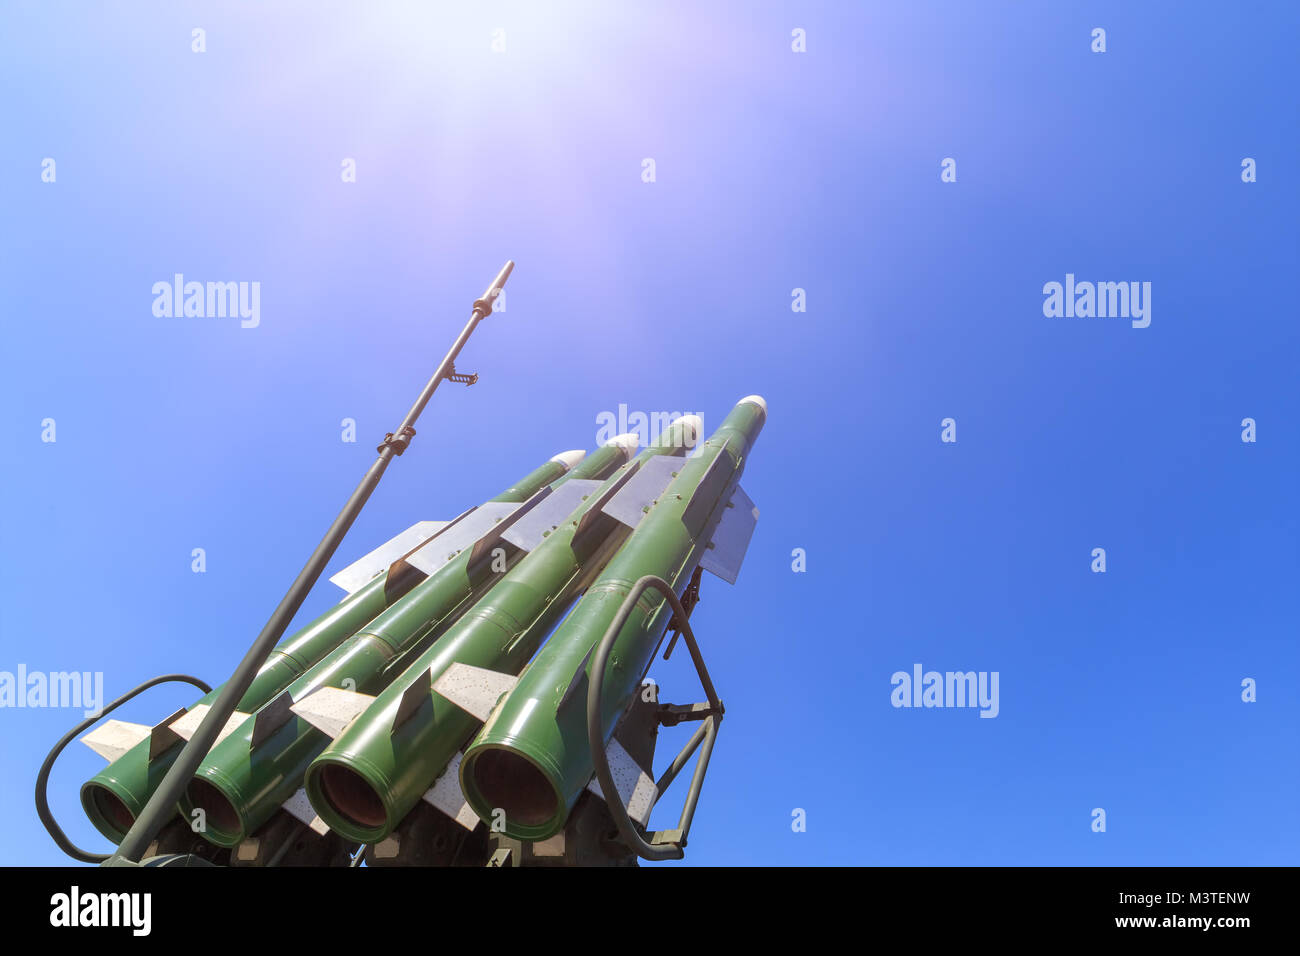 Launcher of the self-propelled system Buk M2 with four missiles on the blue sky background Stock Photo